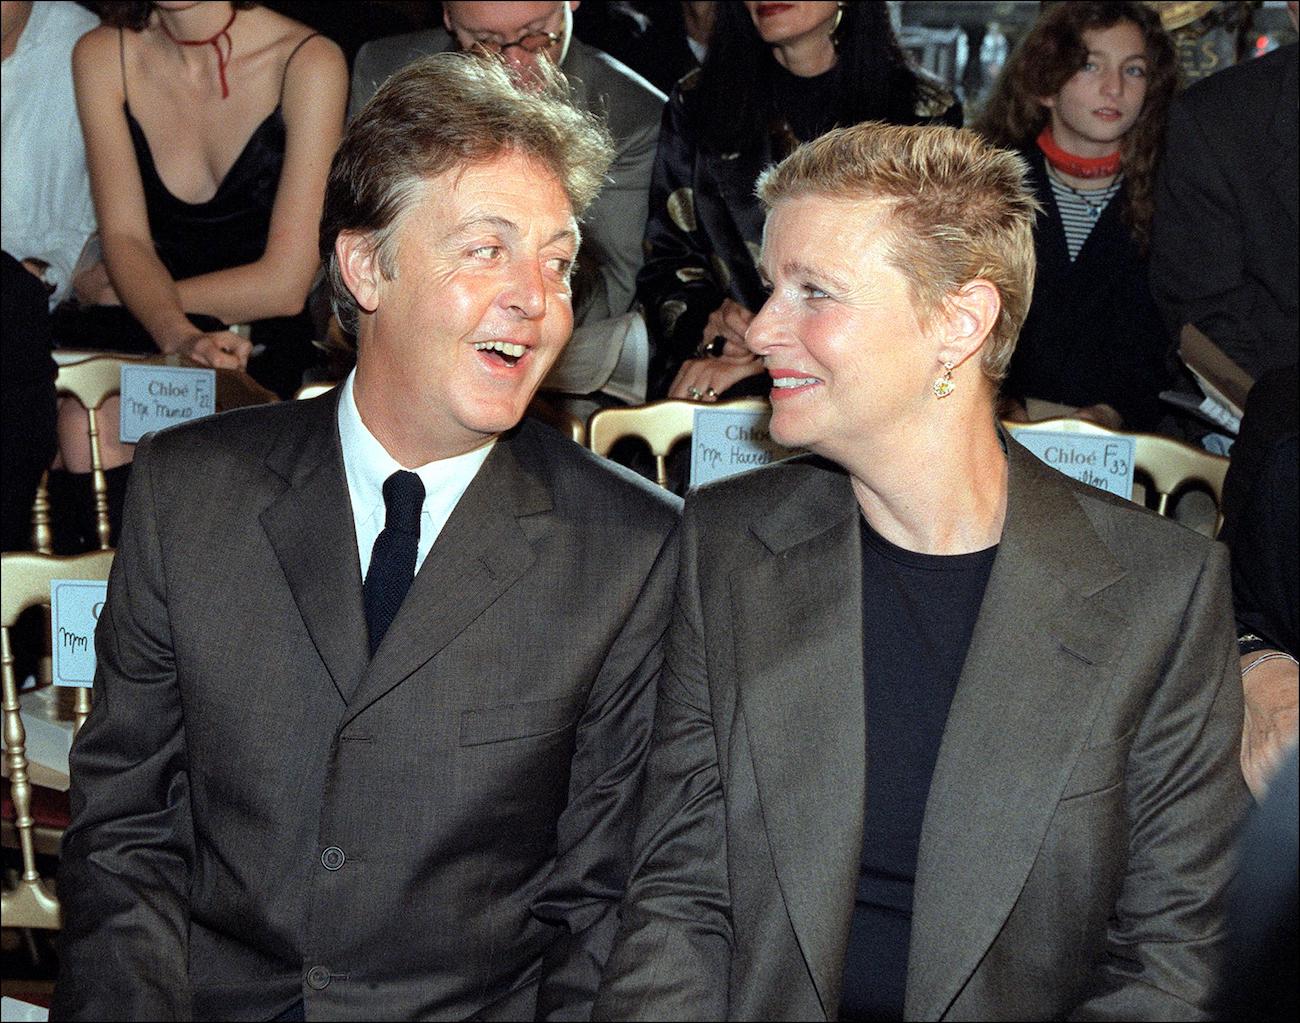 Paul McCartney and his wife Linda McCartney wearing suits at their daughter, Stella's fashion show in 1998.